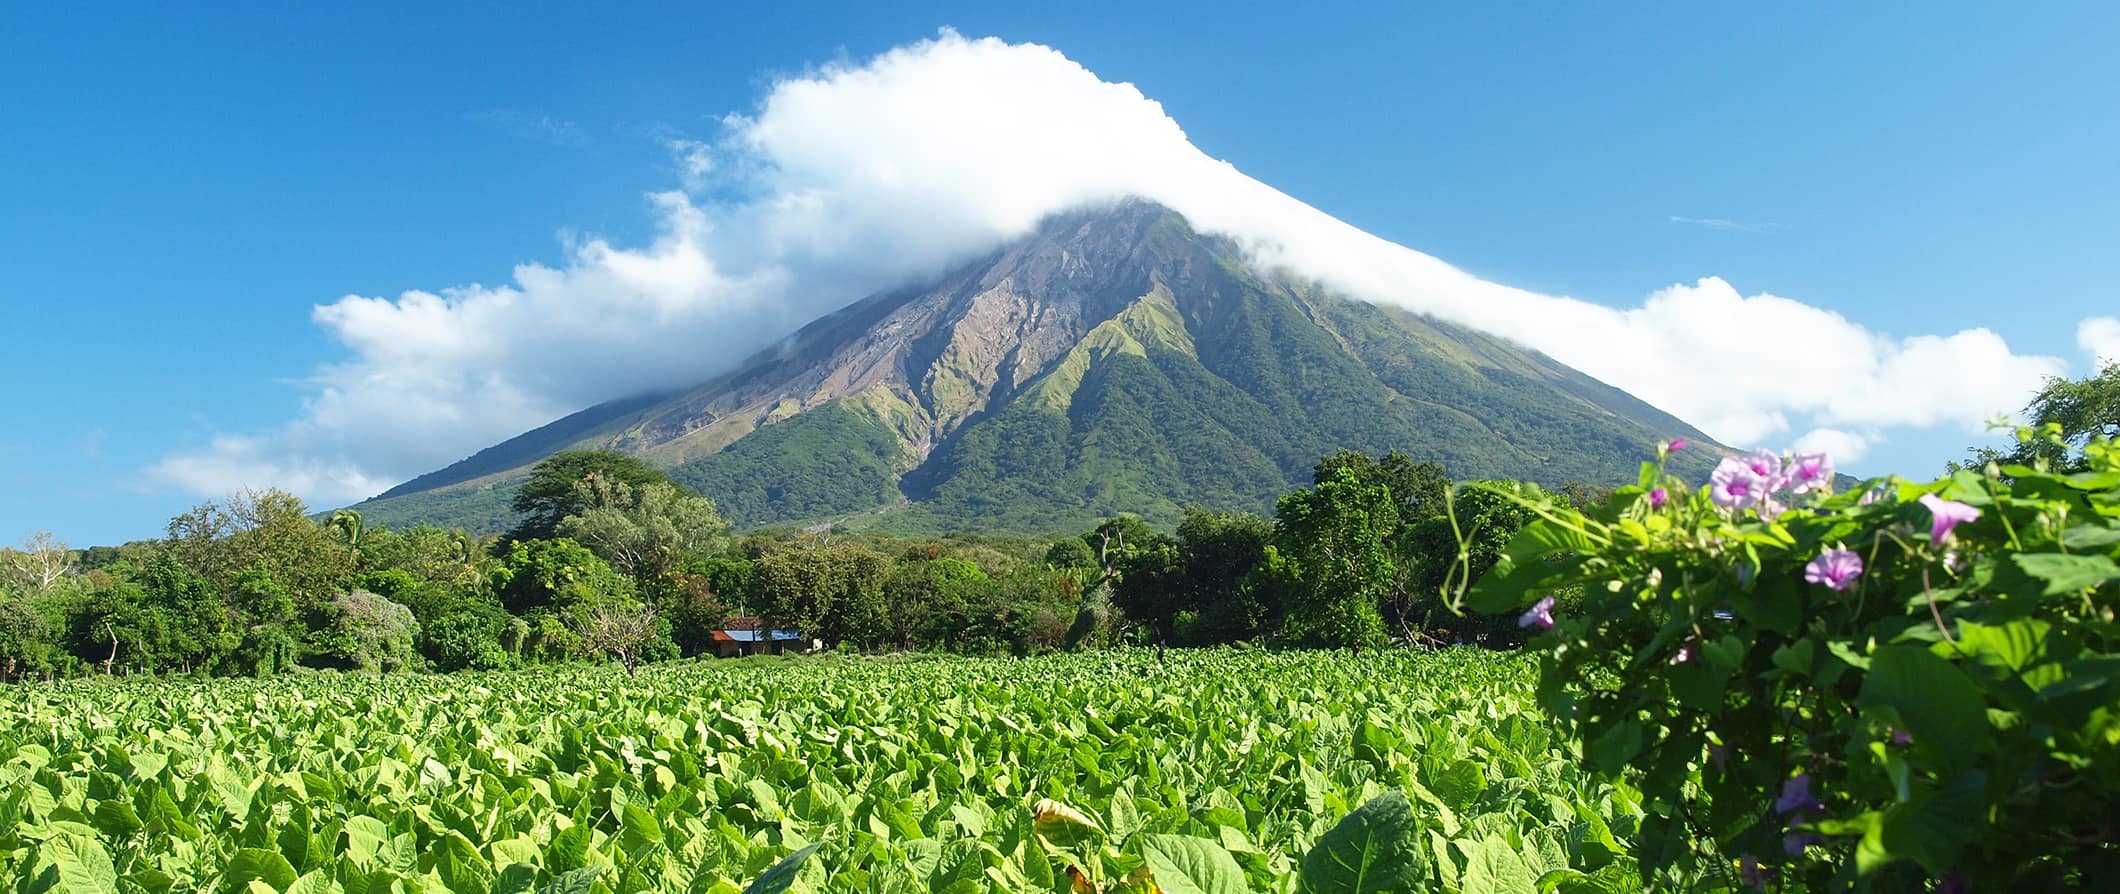 A towering and lush volcano surrounded by jungle on a bright and sunny day in Nicaragua